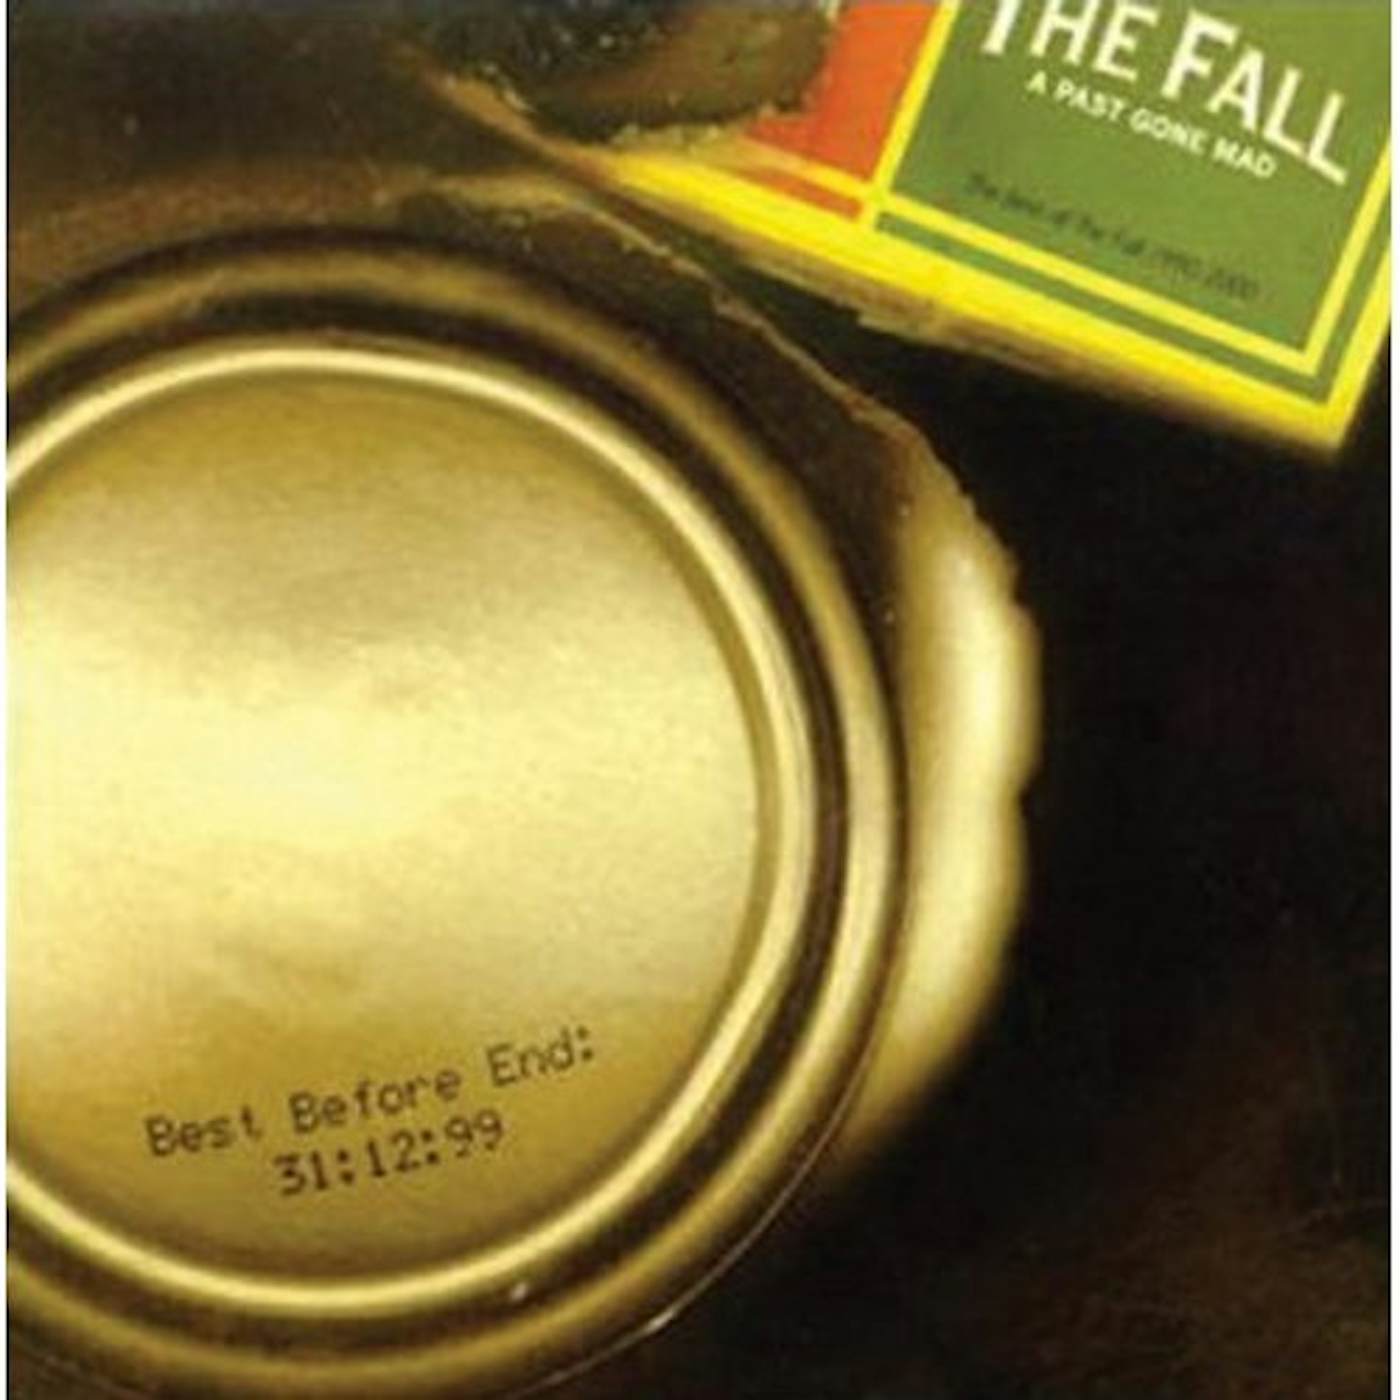 The Fall PAST GONE MAD CD